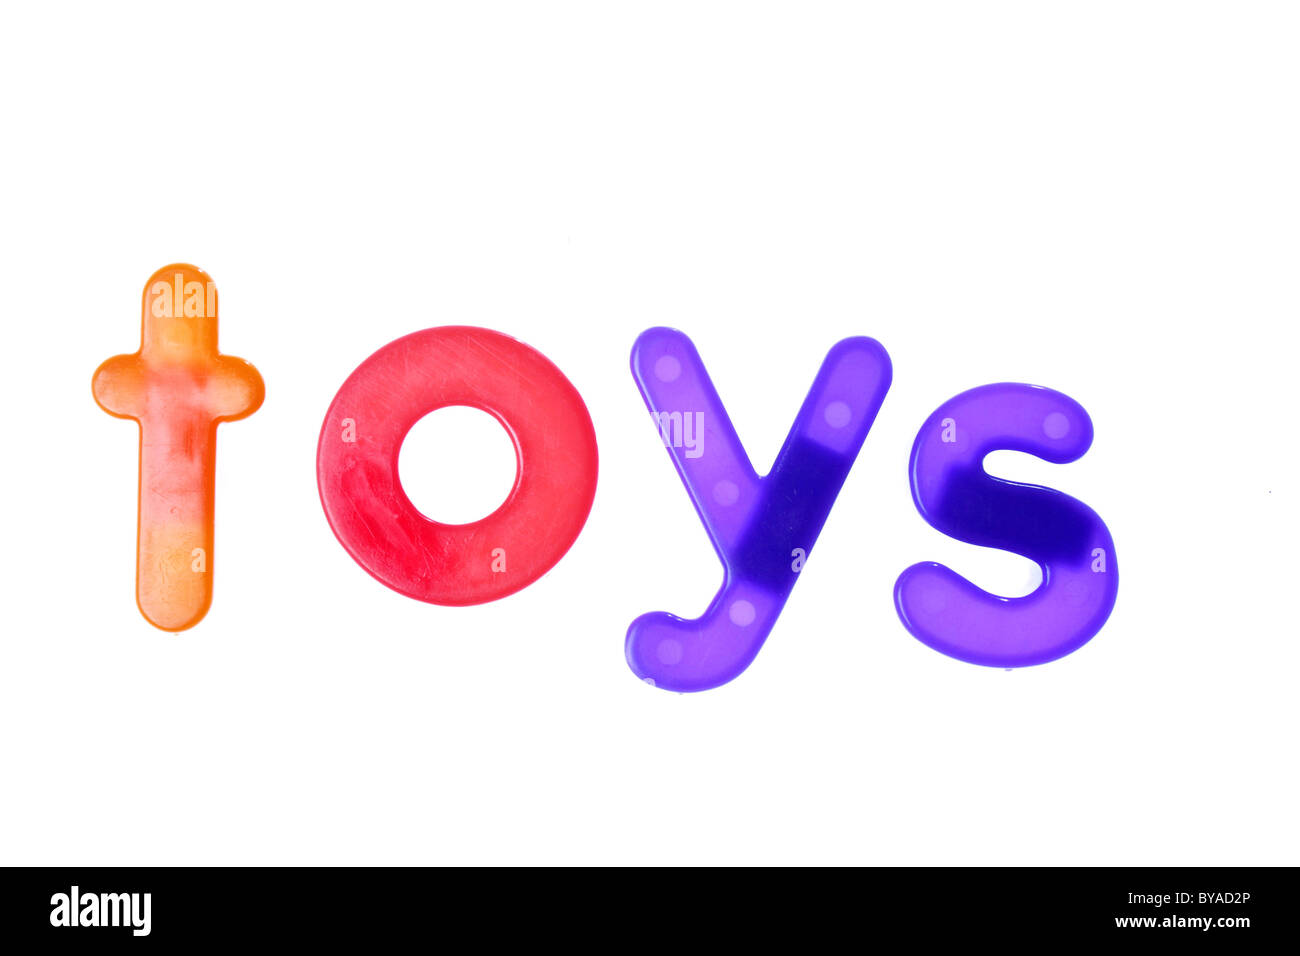 Toys Words 24